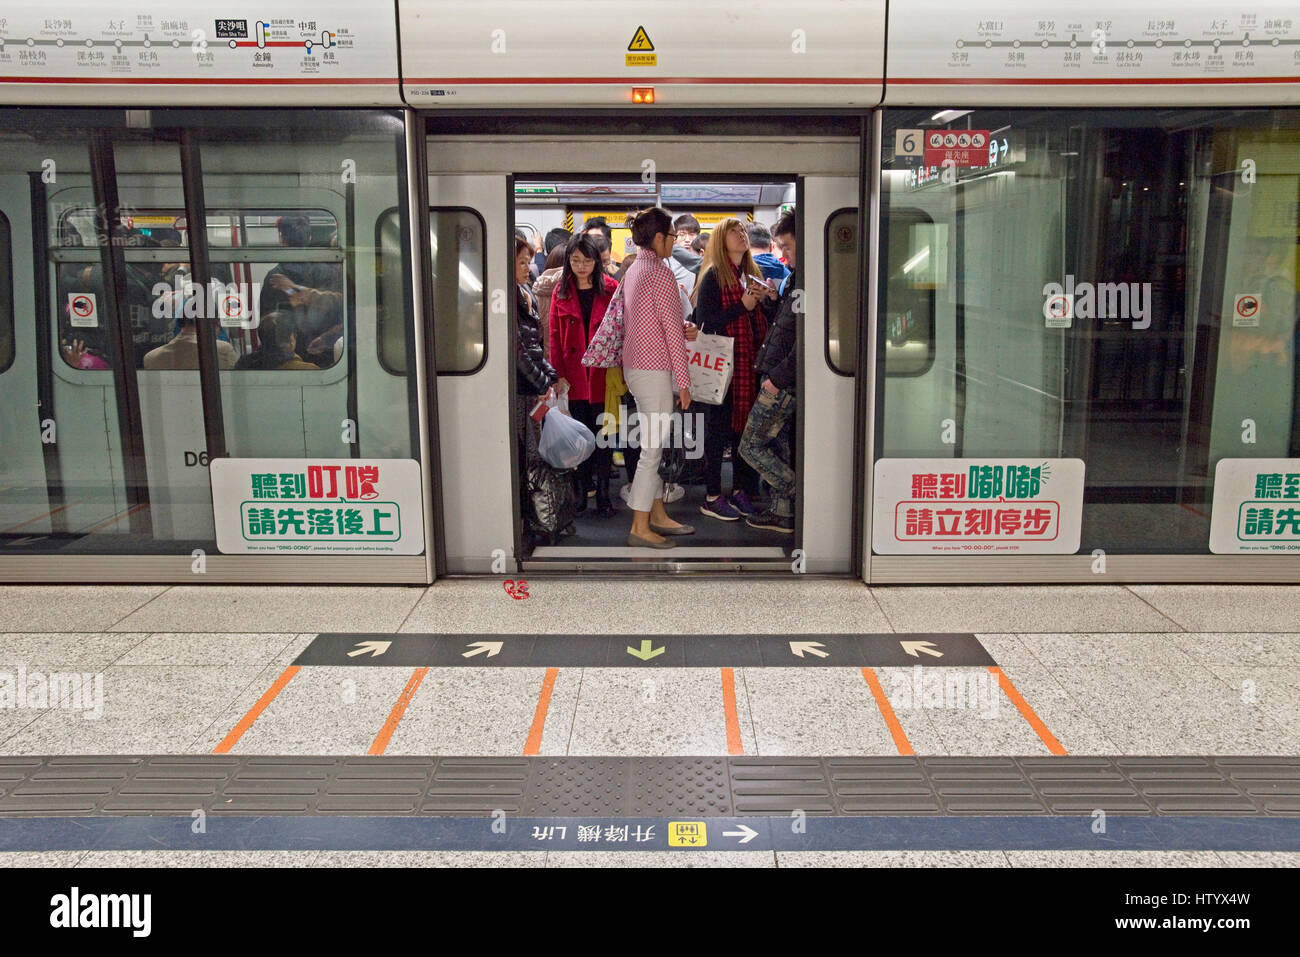 Commuters onboard waiting for the train to depart on the MTR - underground railway system in Hong Kong. Stock Photo